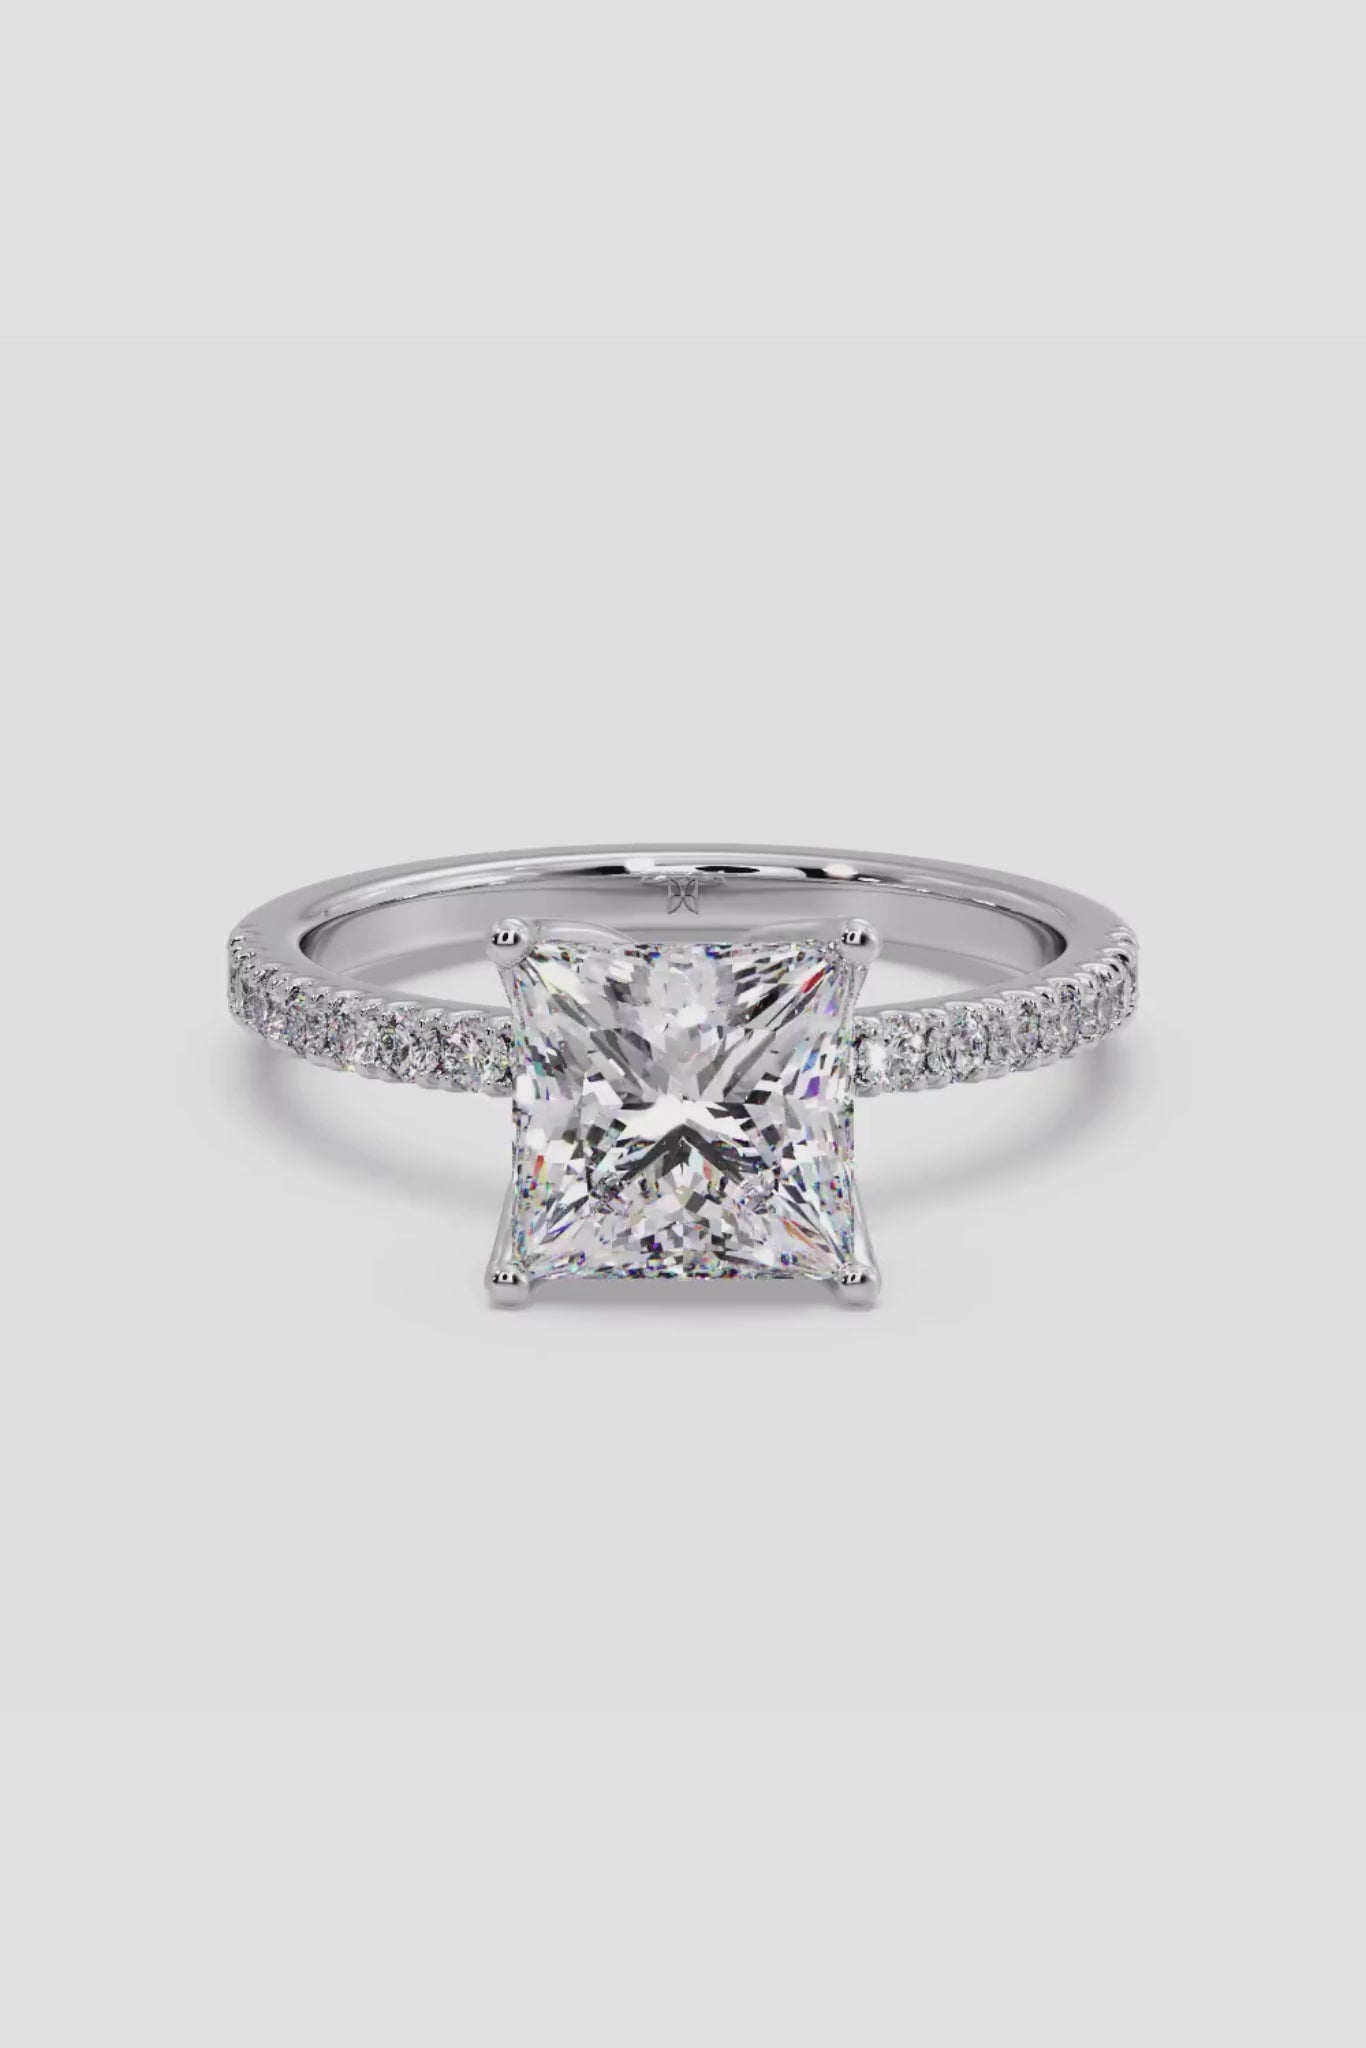 3 ct Princess Solitaire Ring